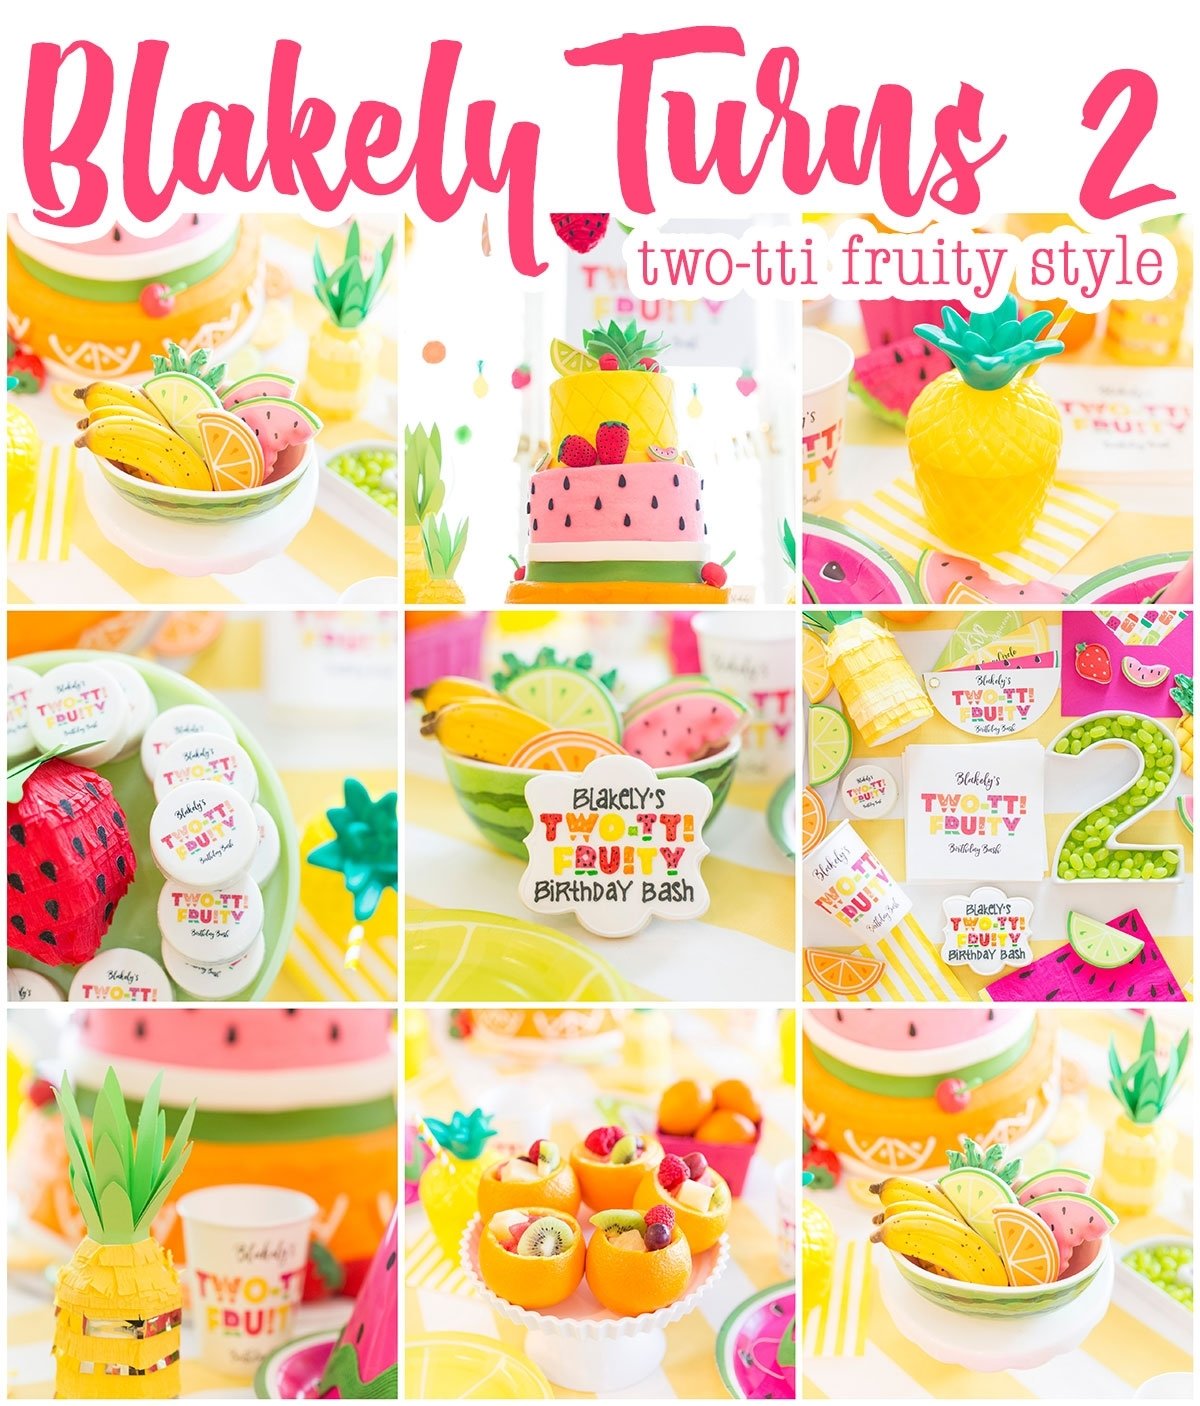 10 Stylish Birthday Party Ideas For 2 Year Old Girl two tti fruity birthday party blakely turns 2 pizzazzerie 16 2022